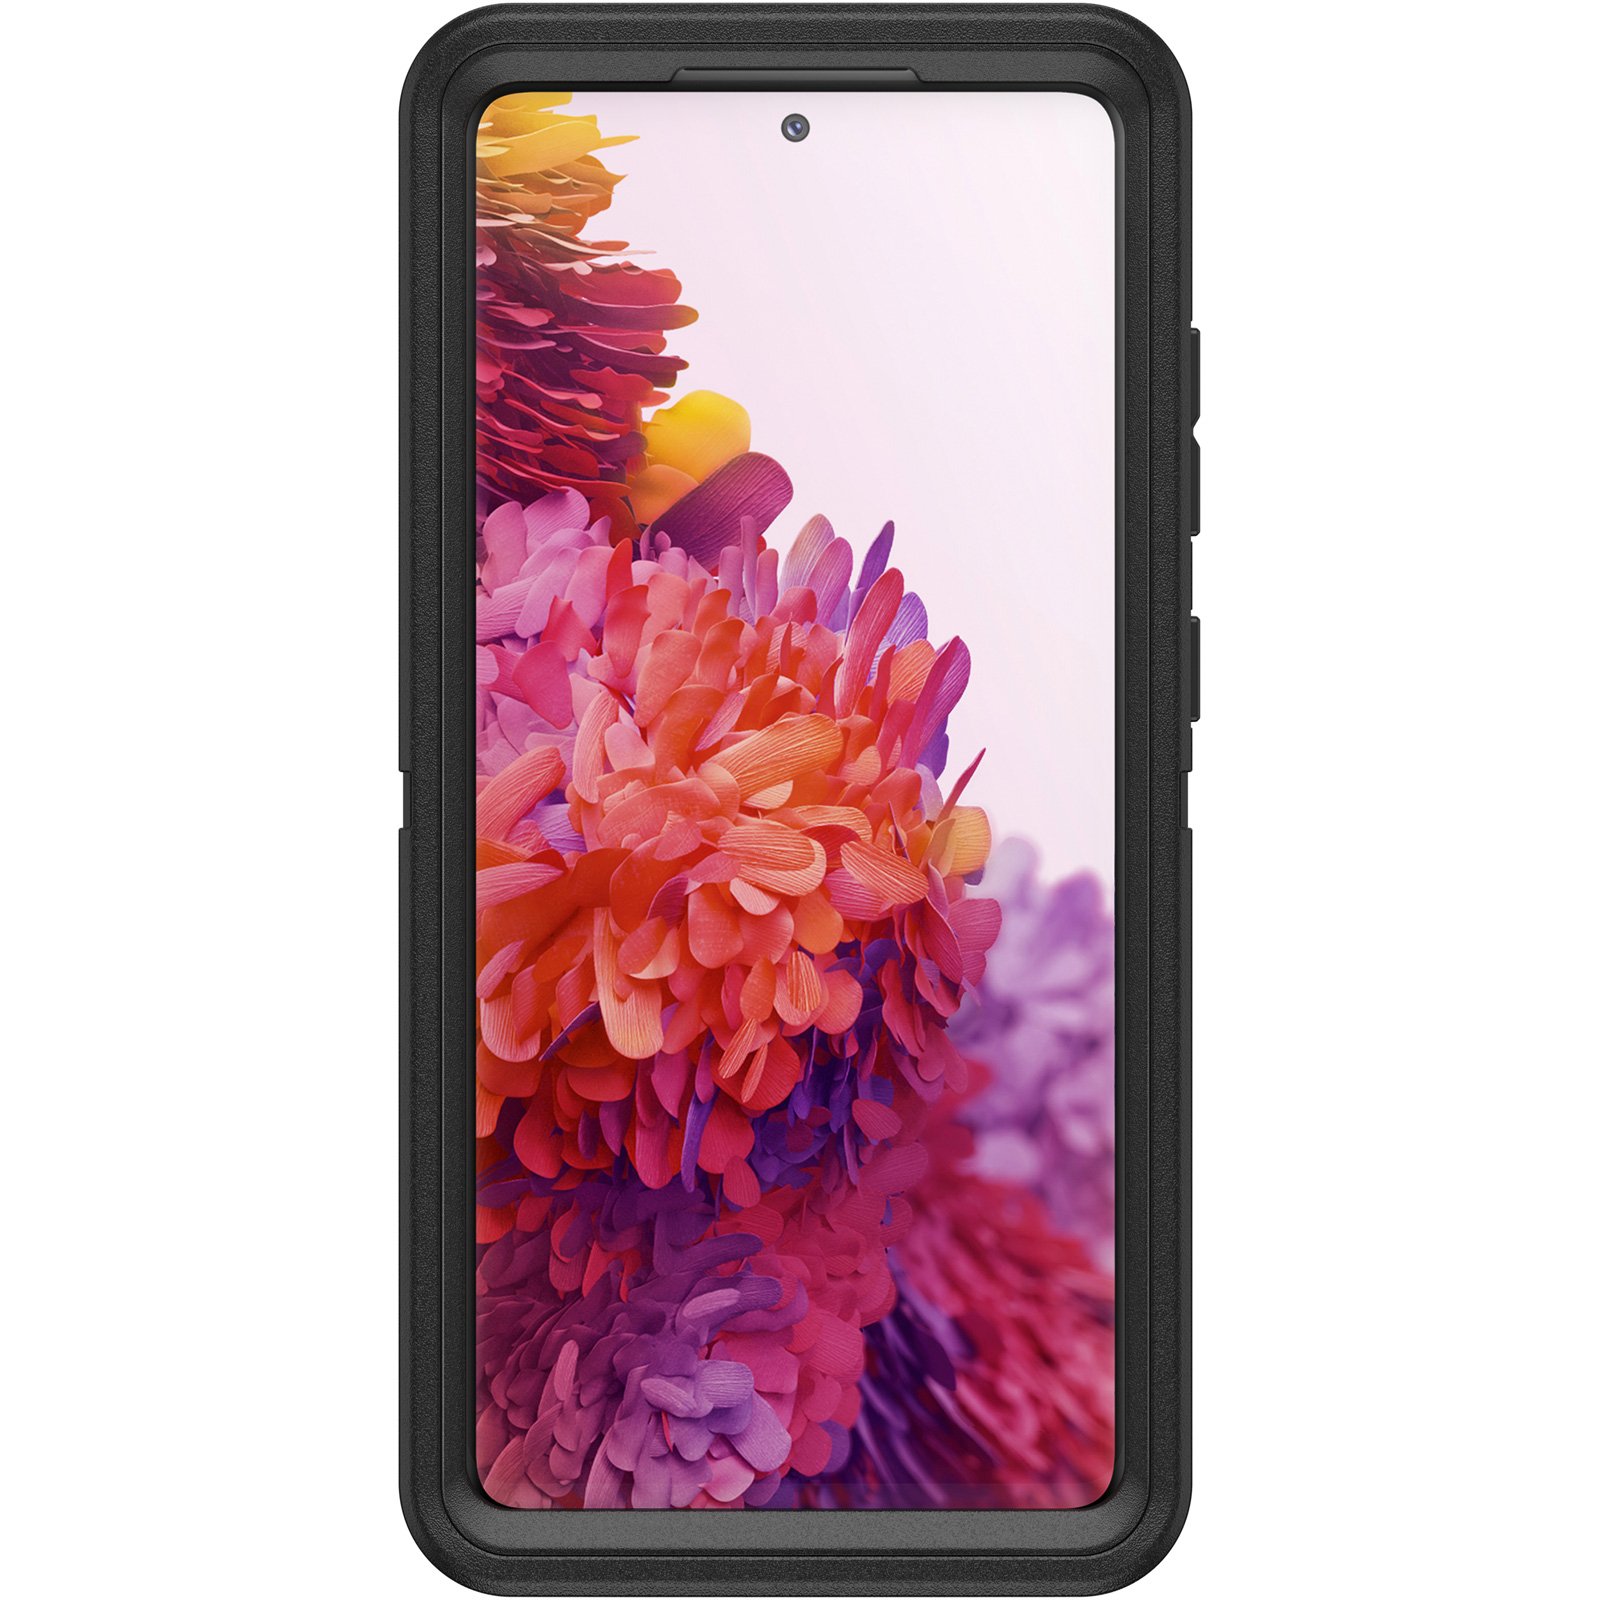 Shop online for latest, best-selling samsung galaxy s20 fe 5g case